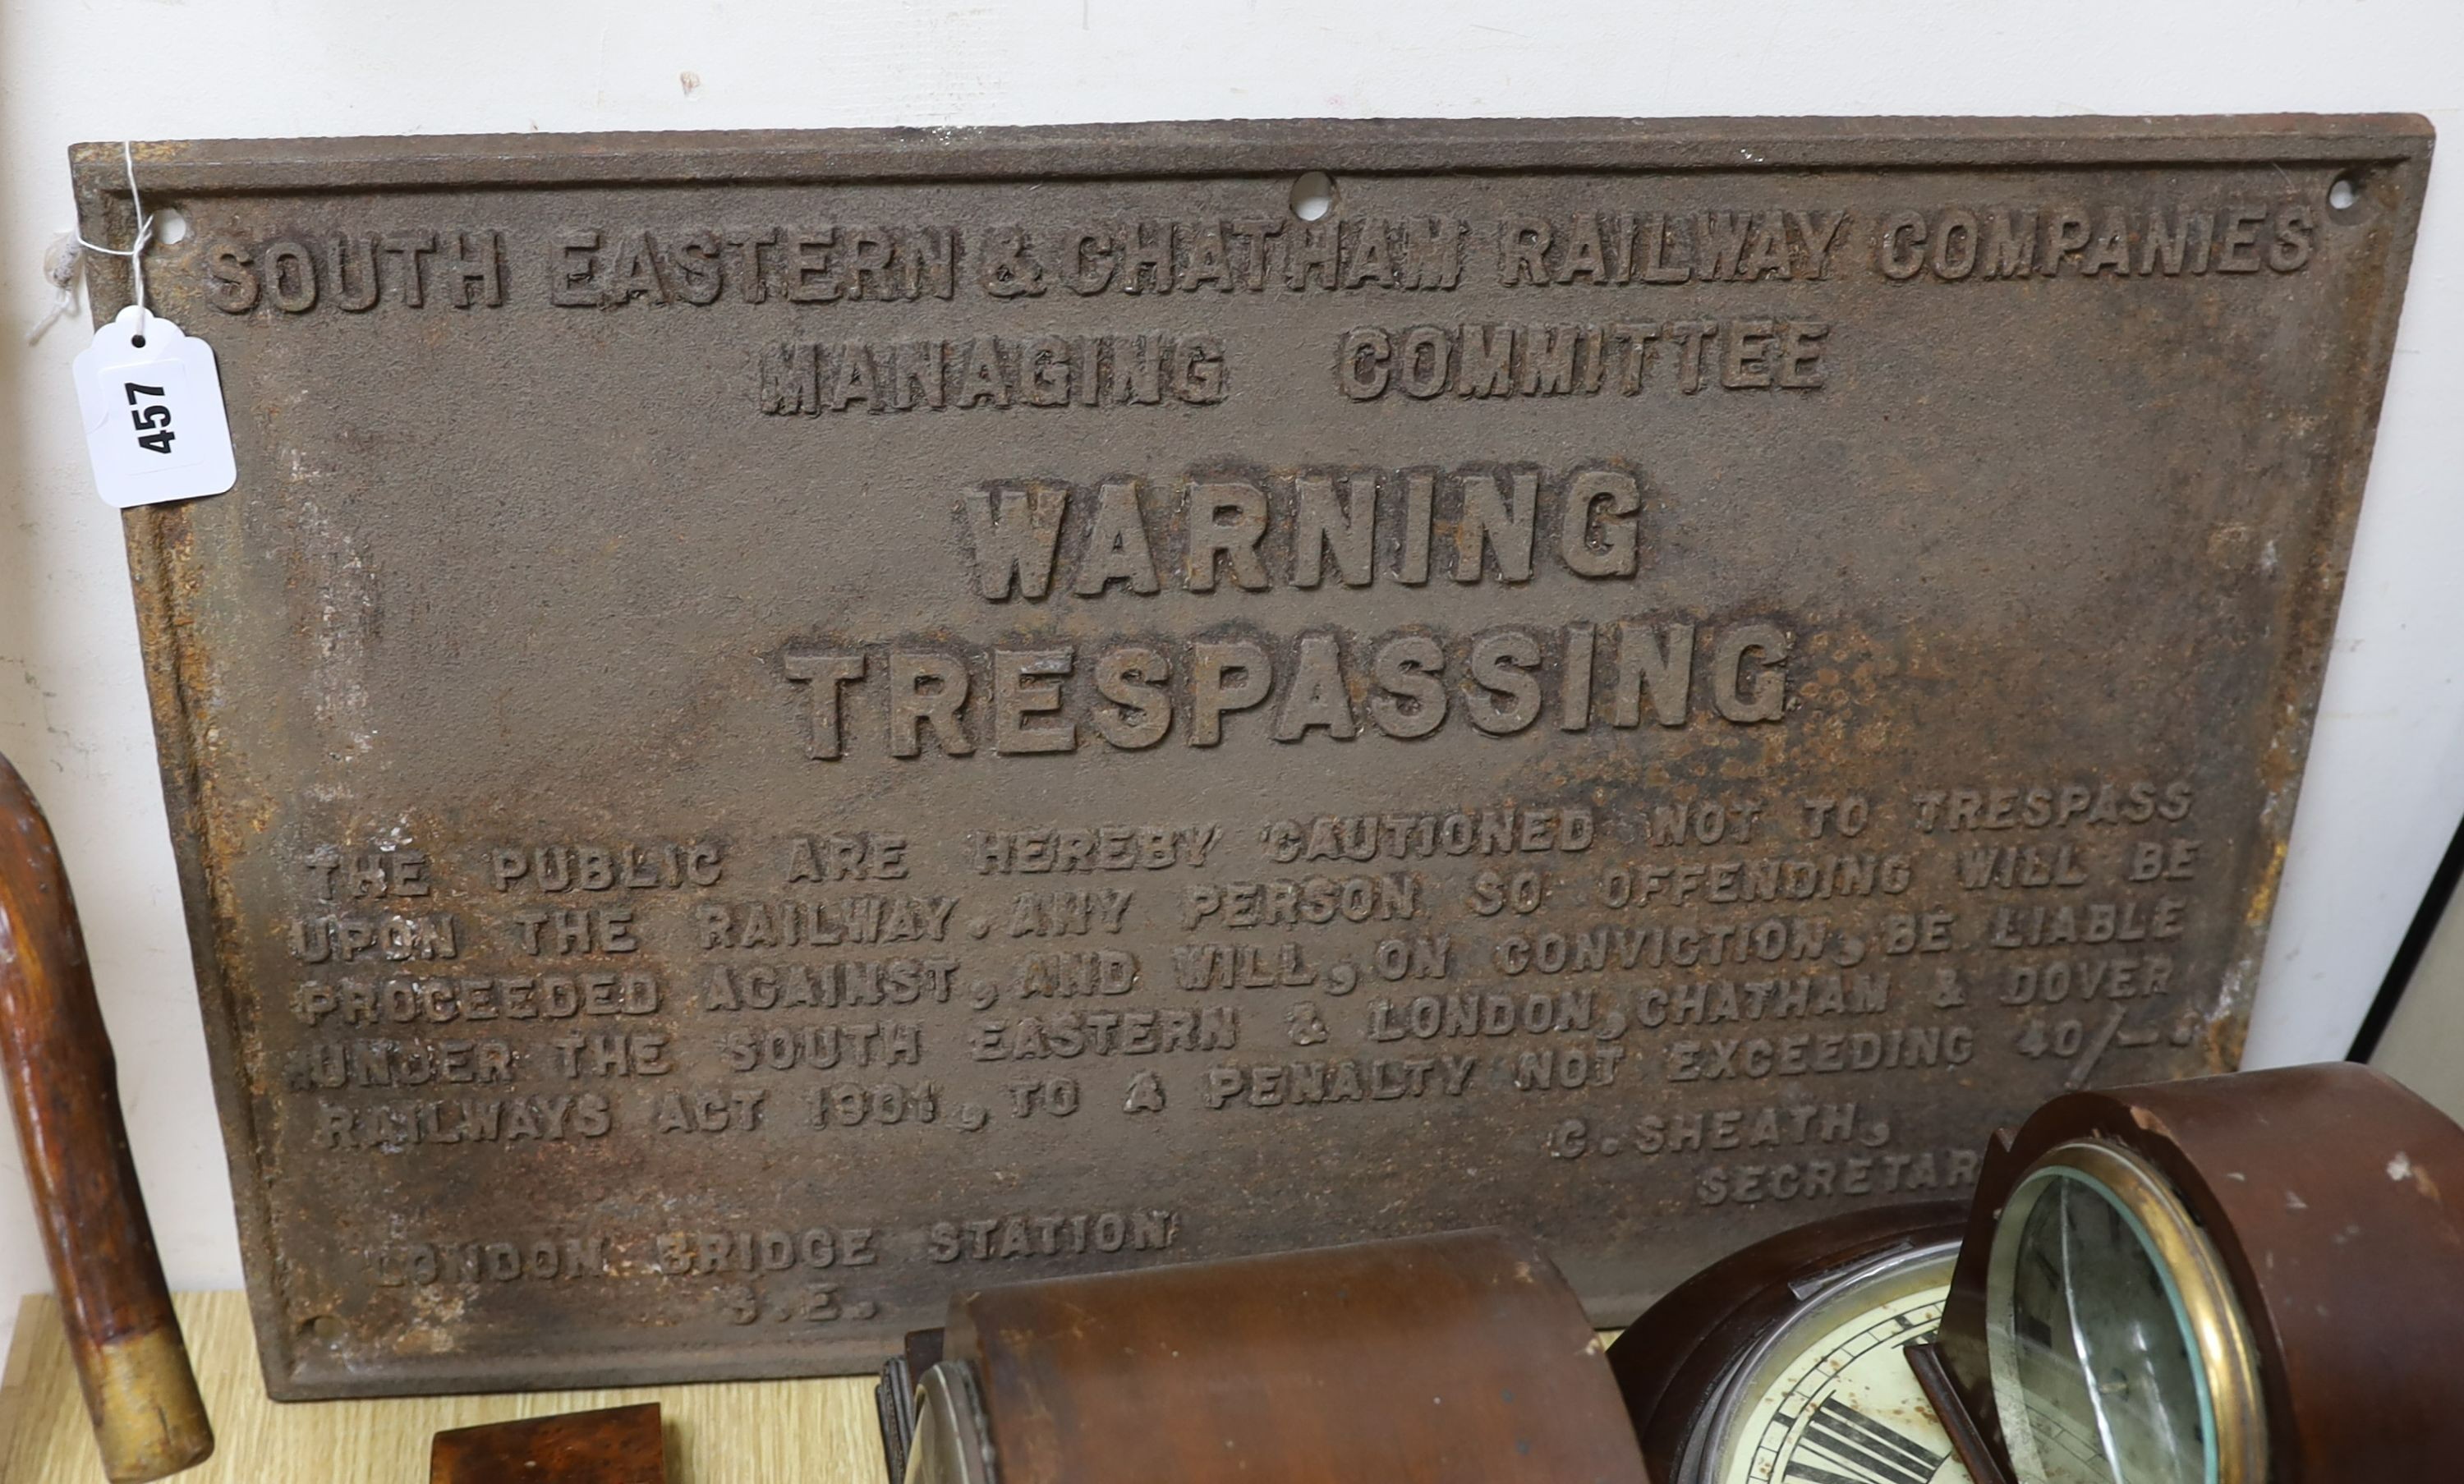 A cast iron South Eastern and Chatham Railway trespassing sign 1899-1923, 41x66cm